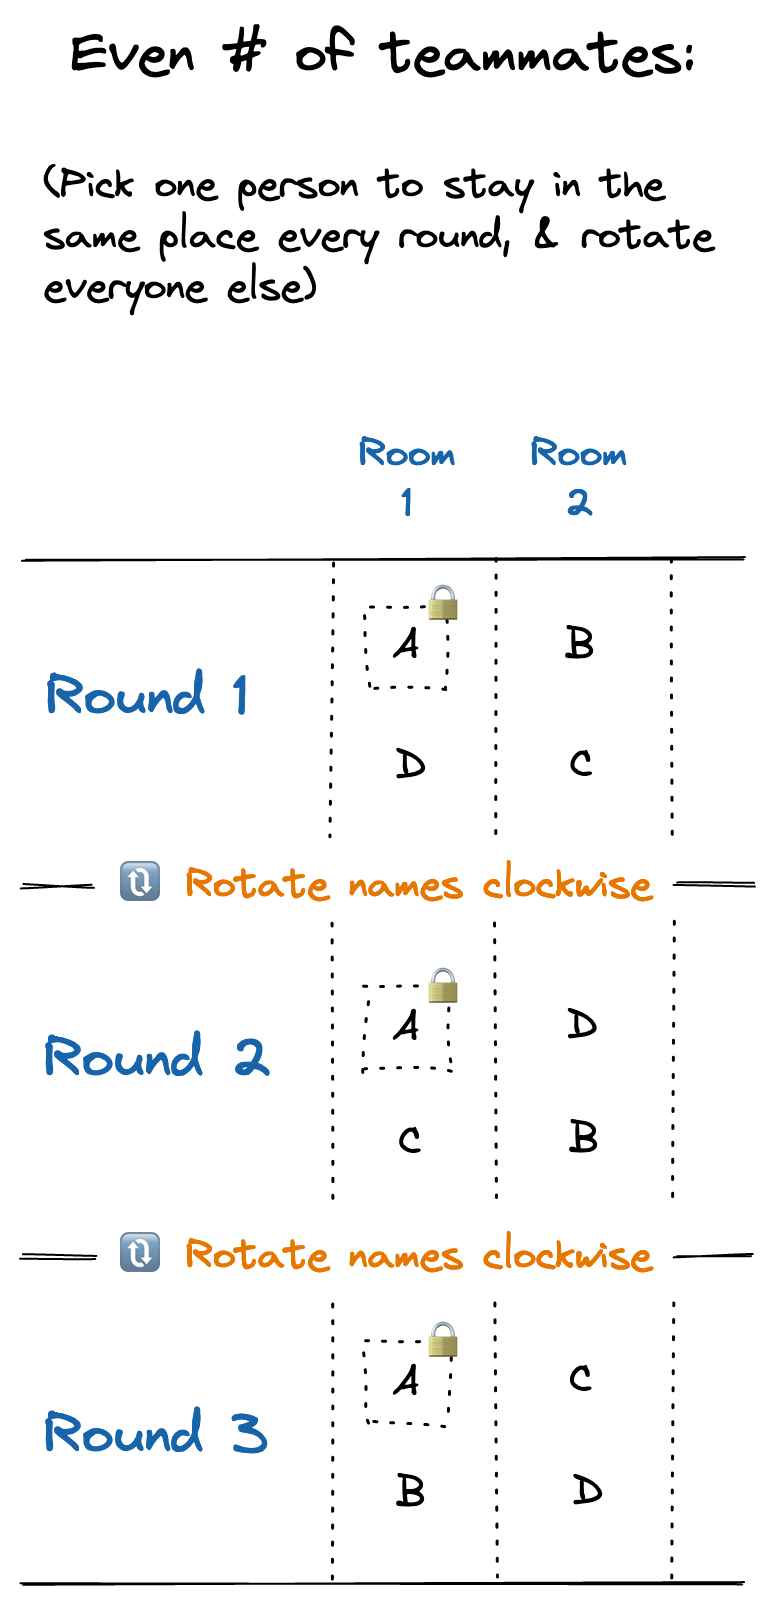 A diagram showing the pair rotations for a team of 4. Detailed description below.